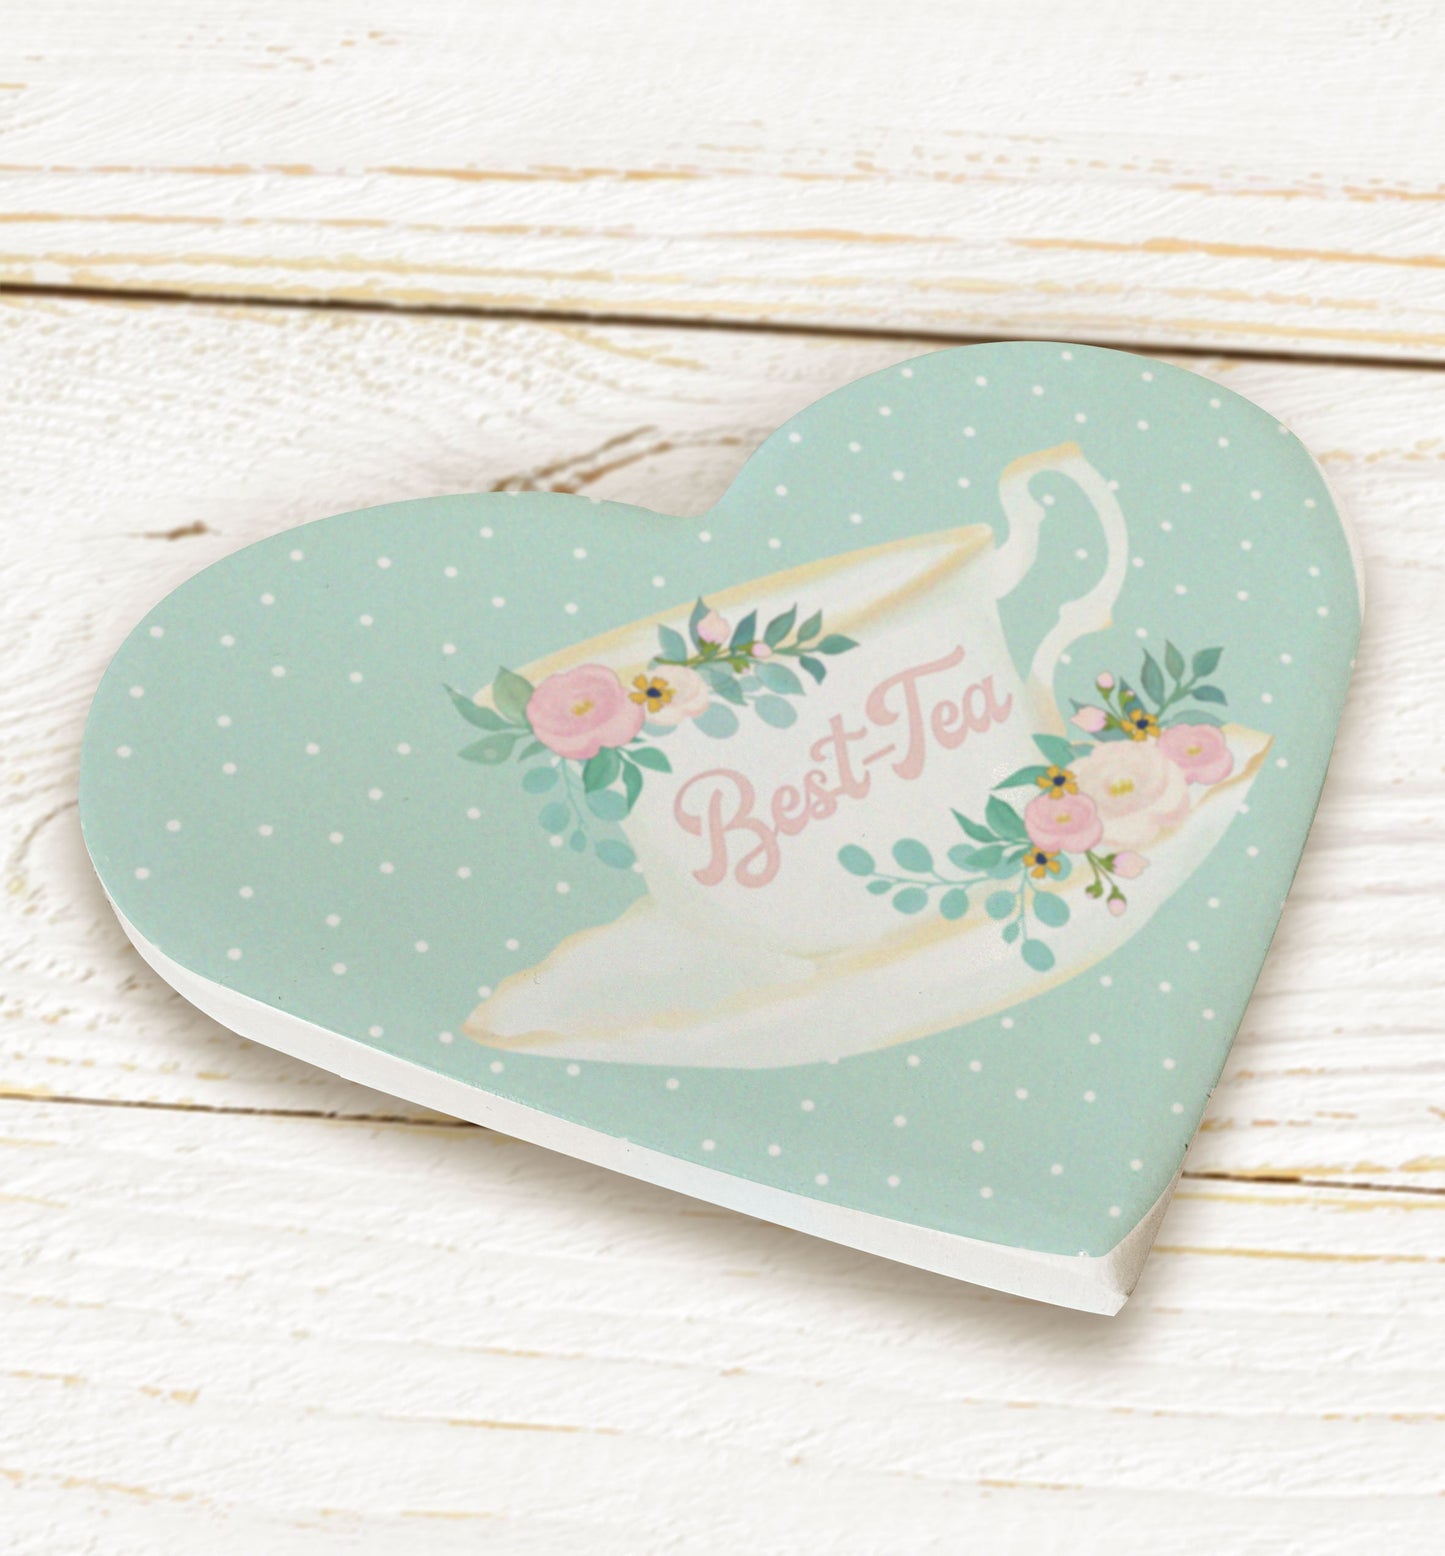 Best-Tea Ceramic Heart Coaster. Personalised Coaster. Fun gift for best friends. Home office Gift.